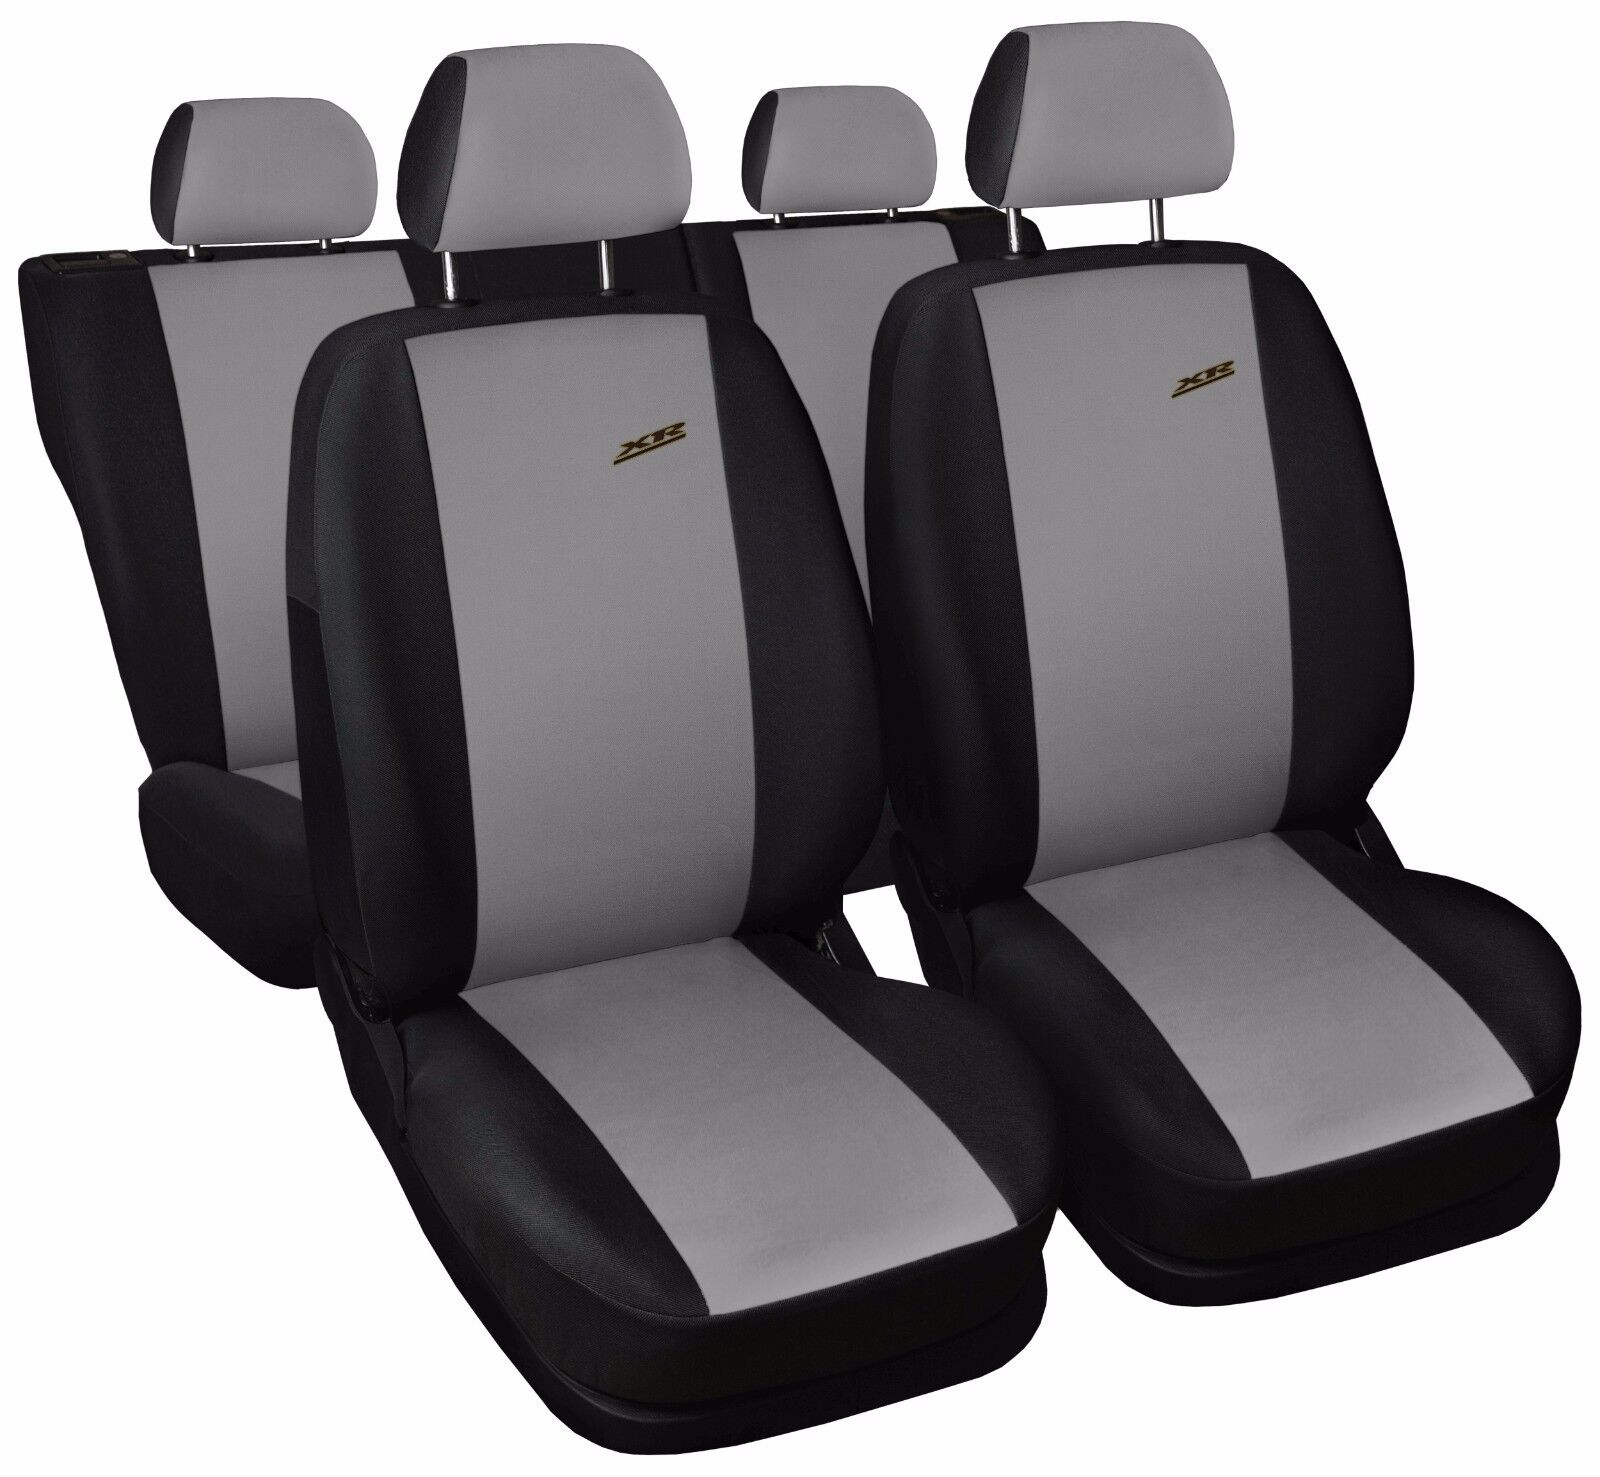 Car seat covers fit Seat Ibiza - XR black/grey full set sport style